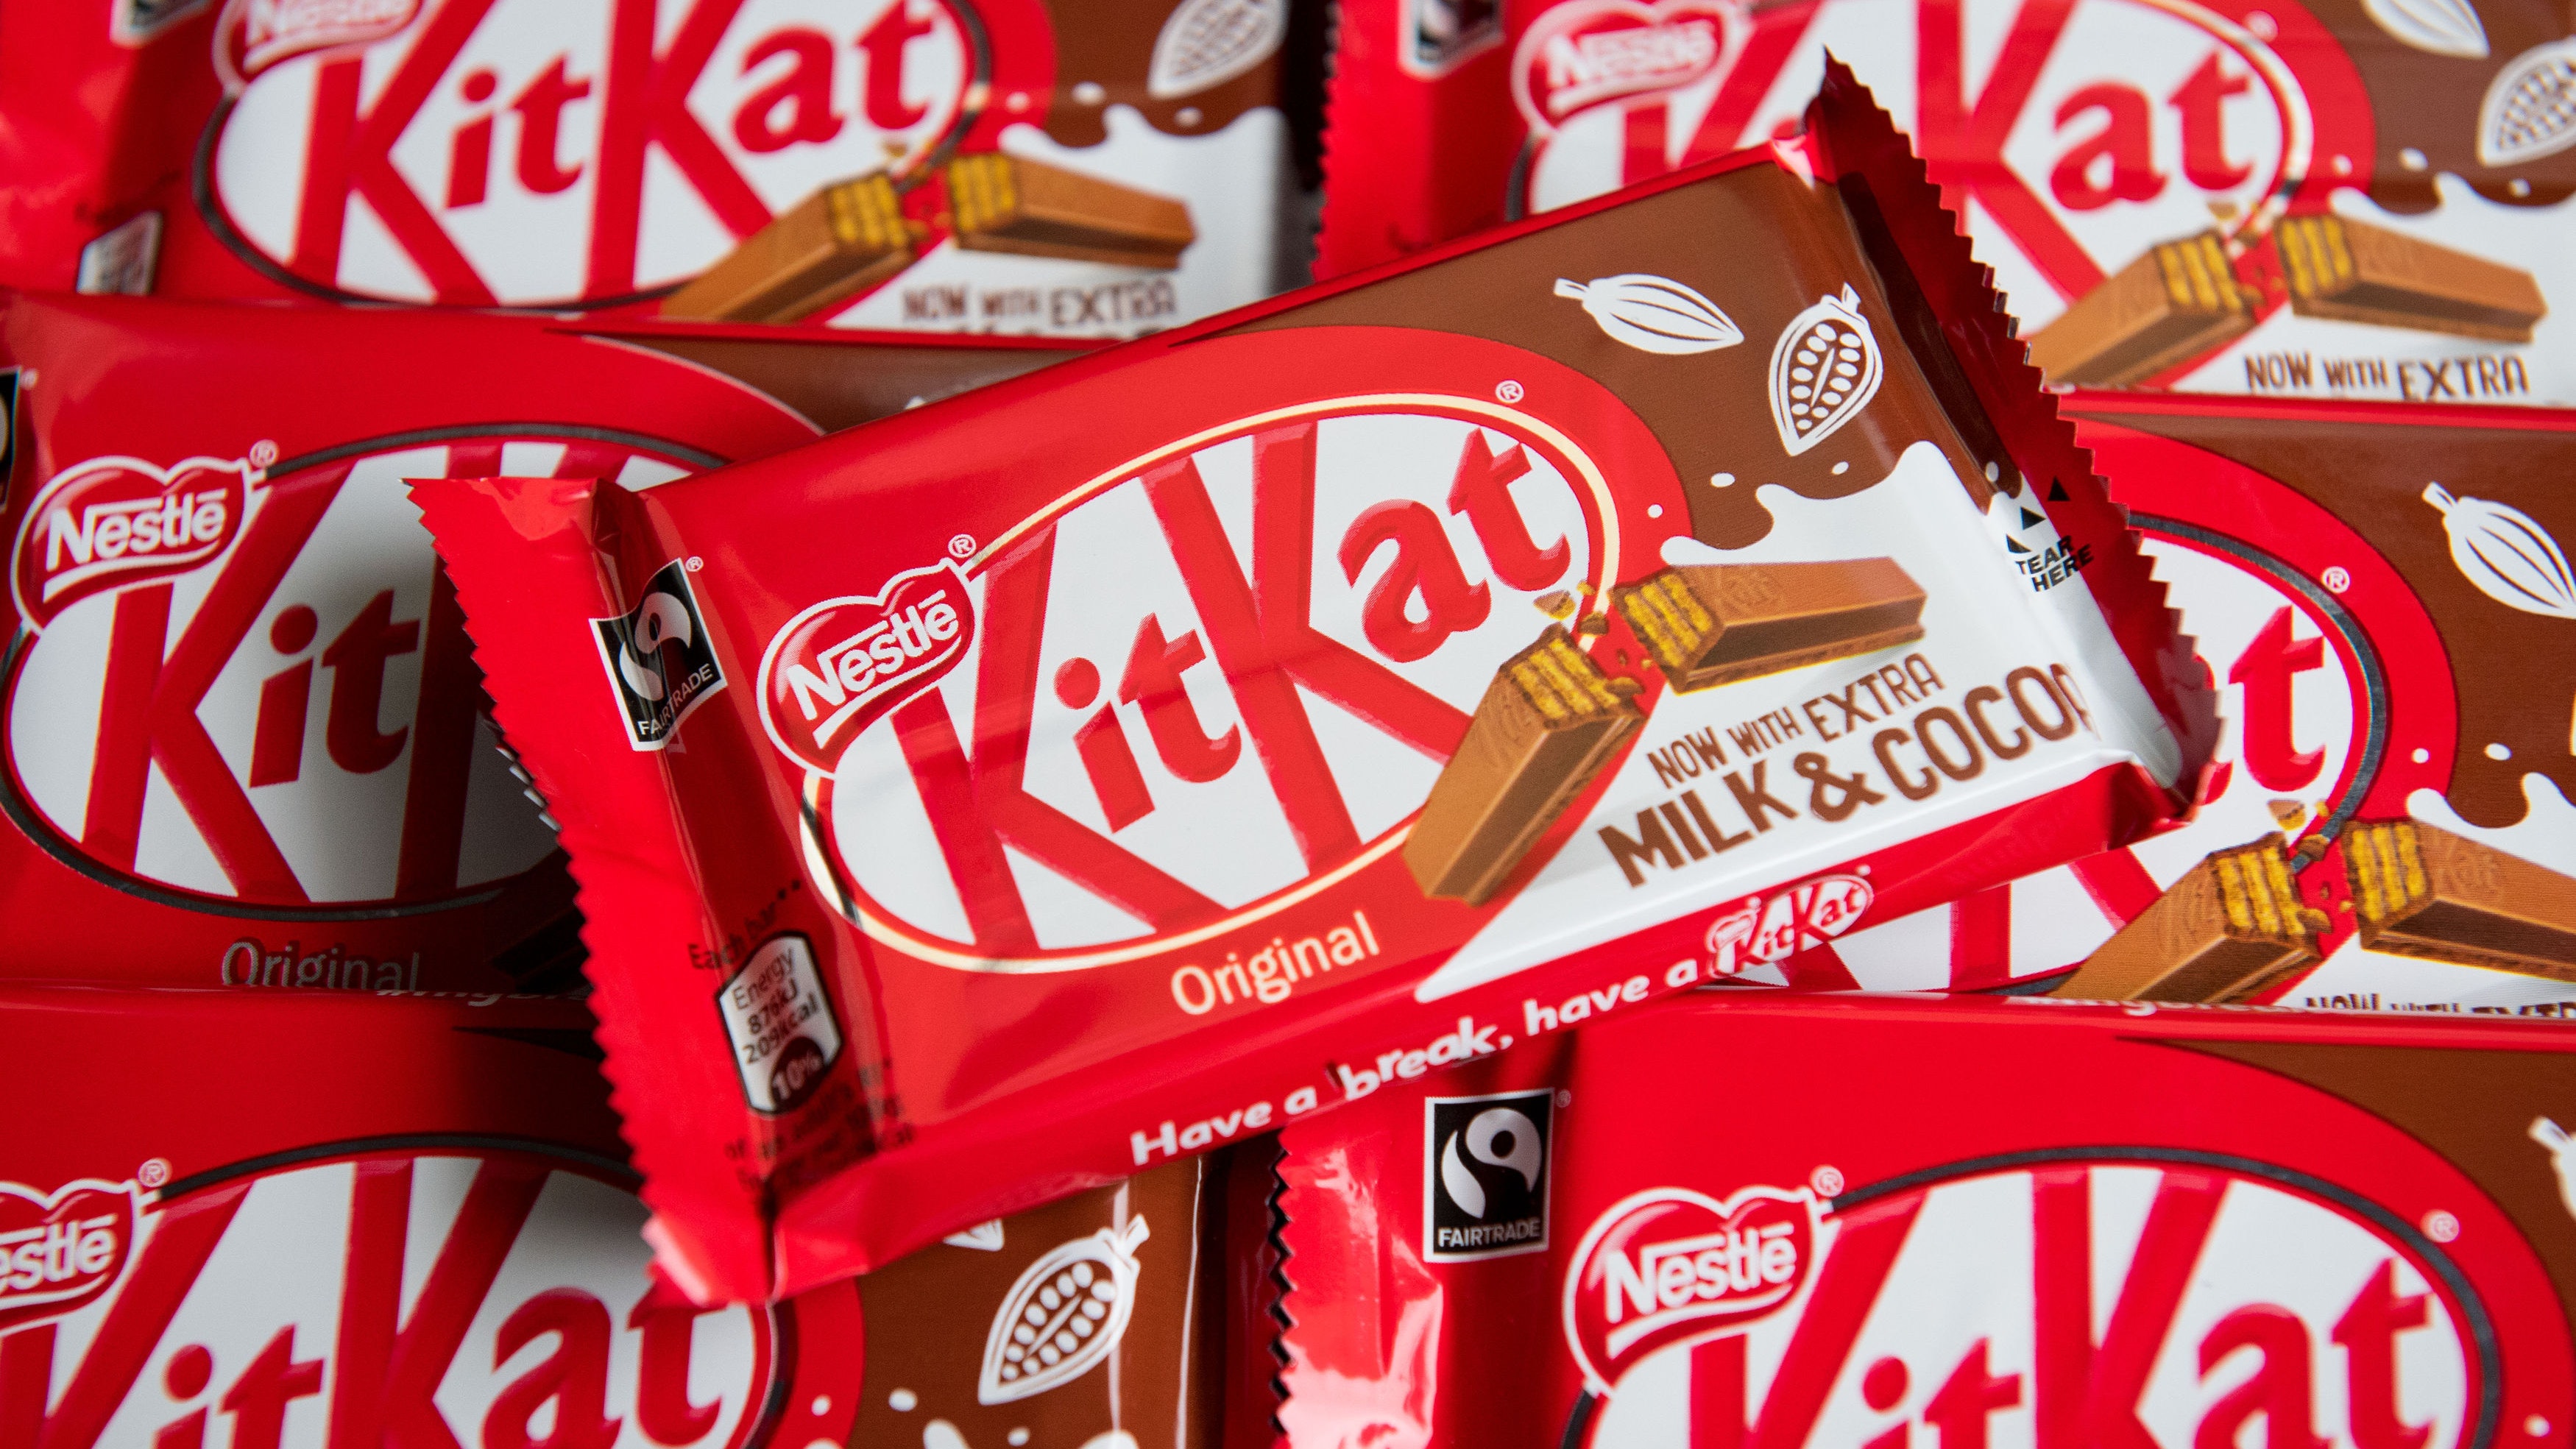 KitKat Drumsticks are the New Dessert for Chocolate Lovers.